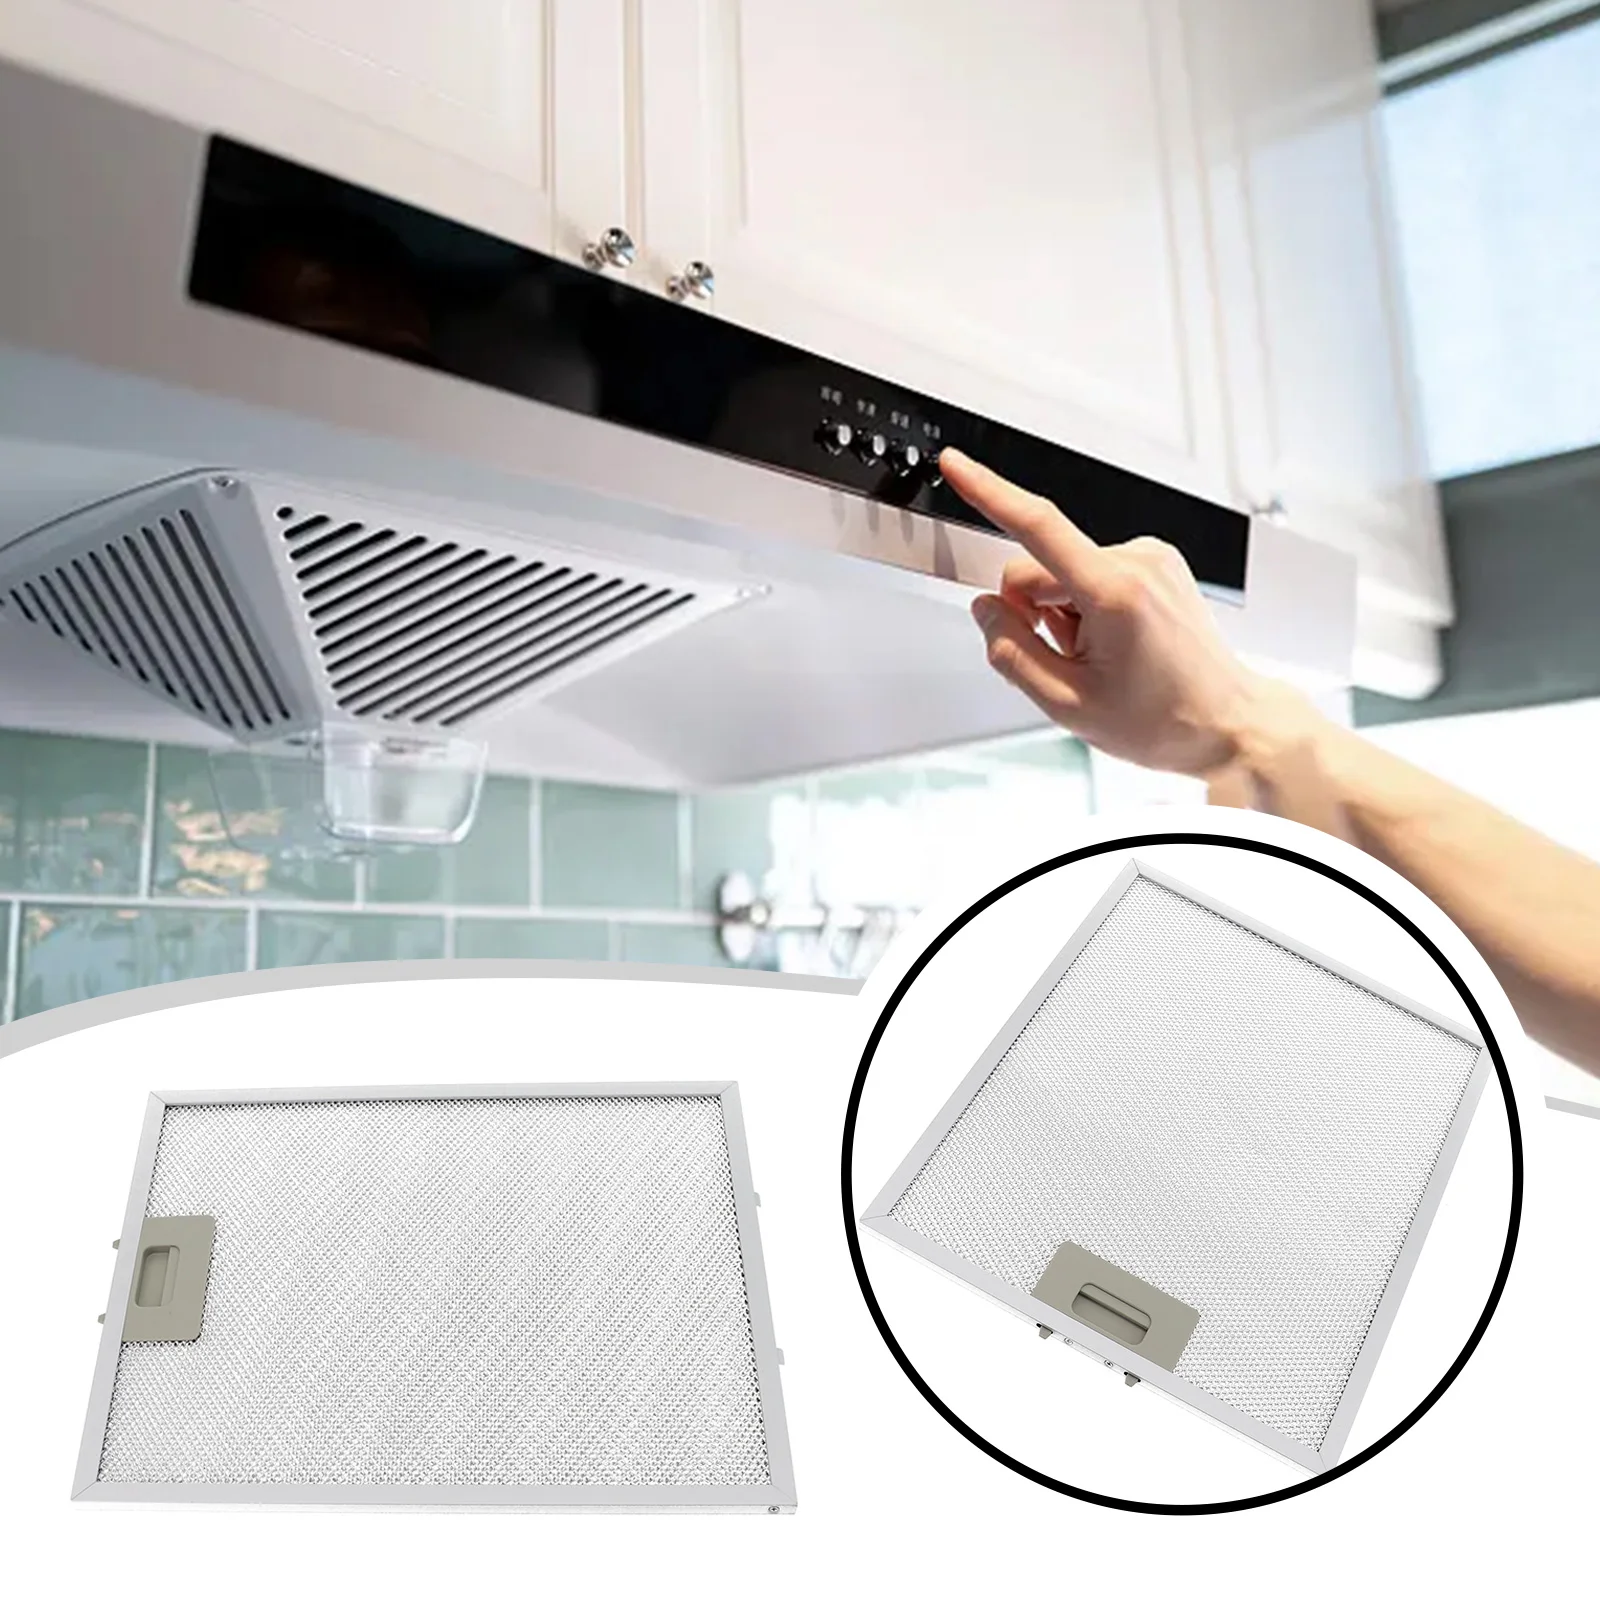 

Range Hood Filter Oil Screen Oil 340x280x9mm Exhaust Fans Ventilators HVAC Systems Parts Cleaning Replace Accessories